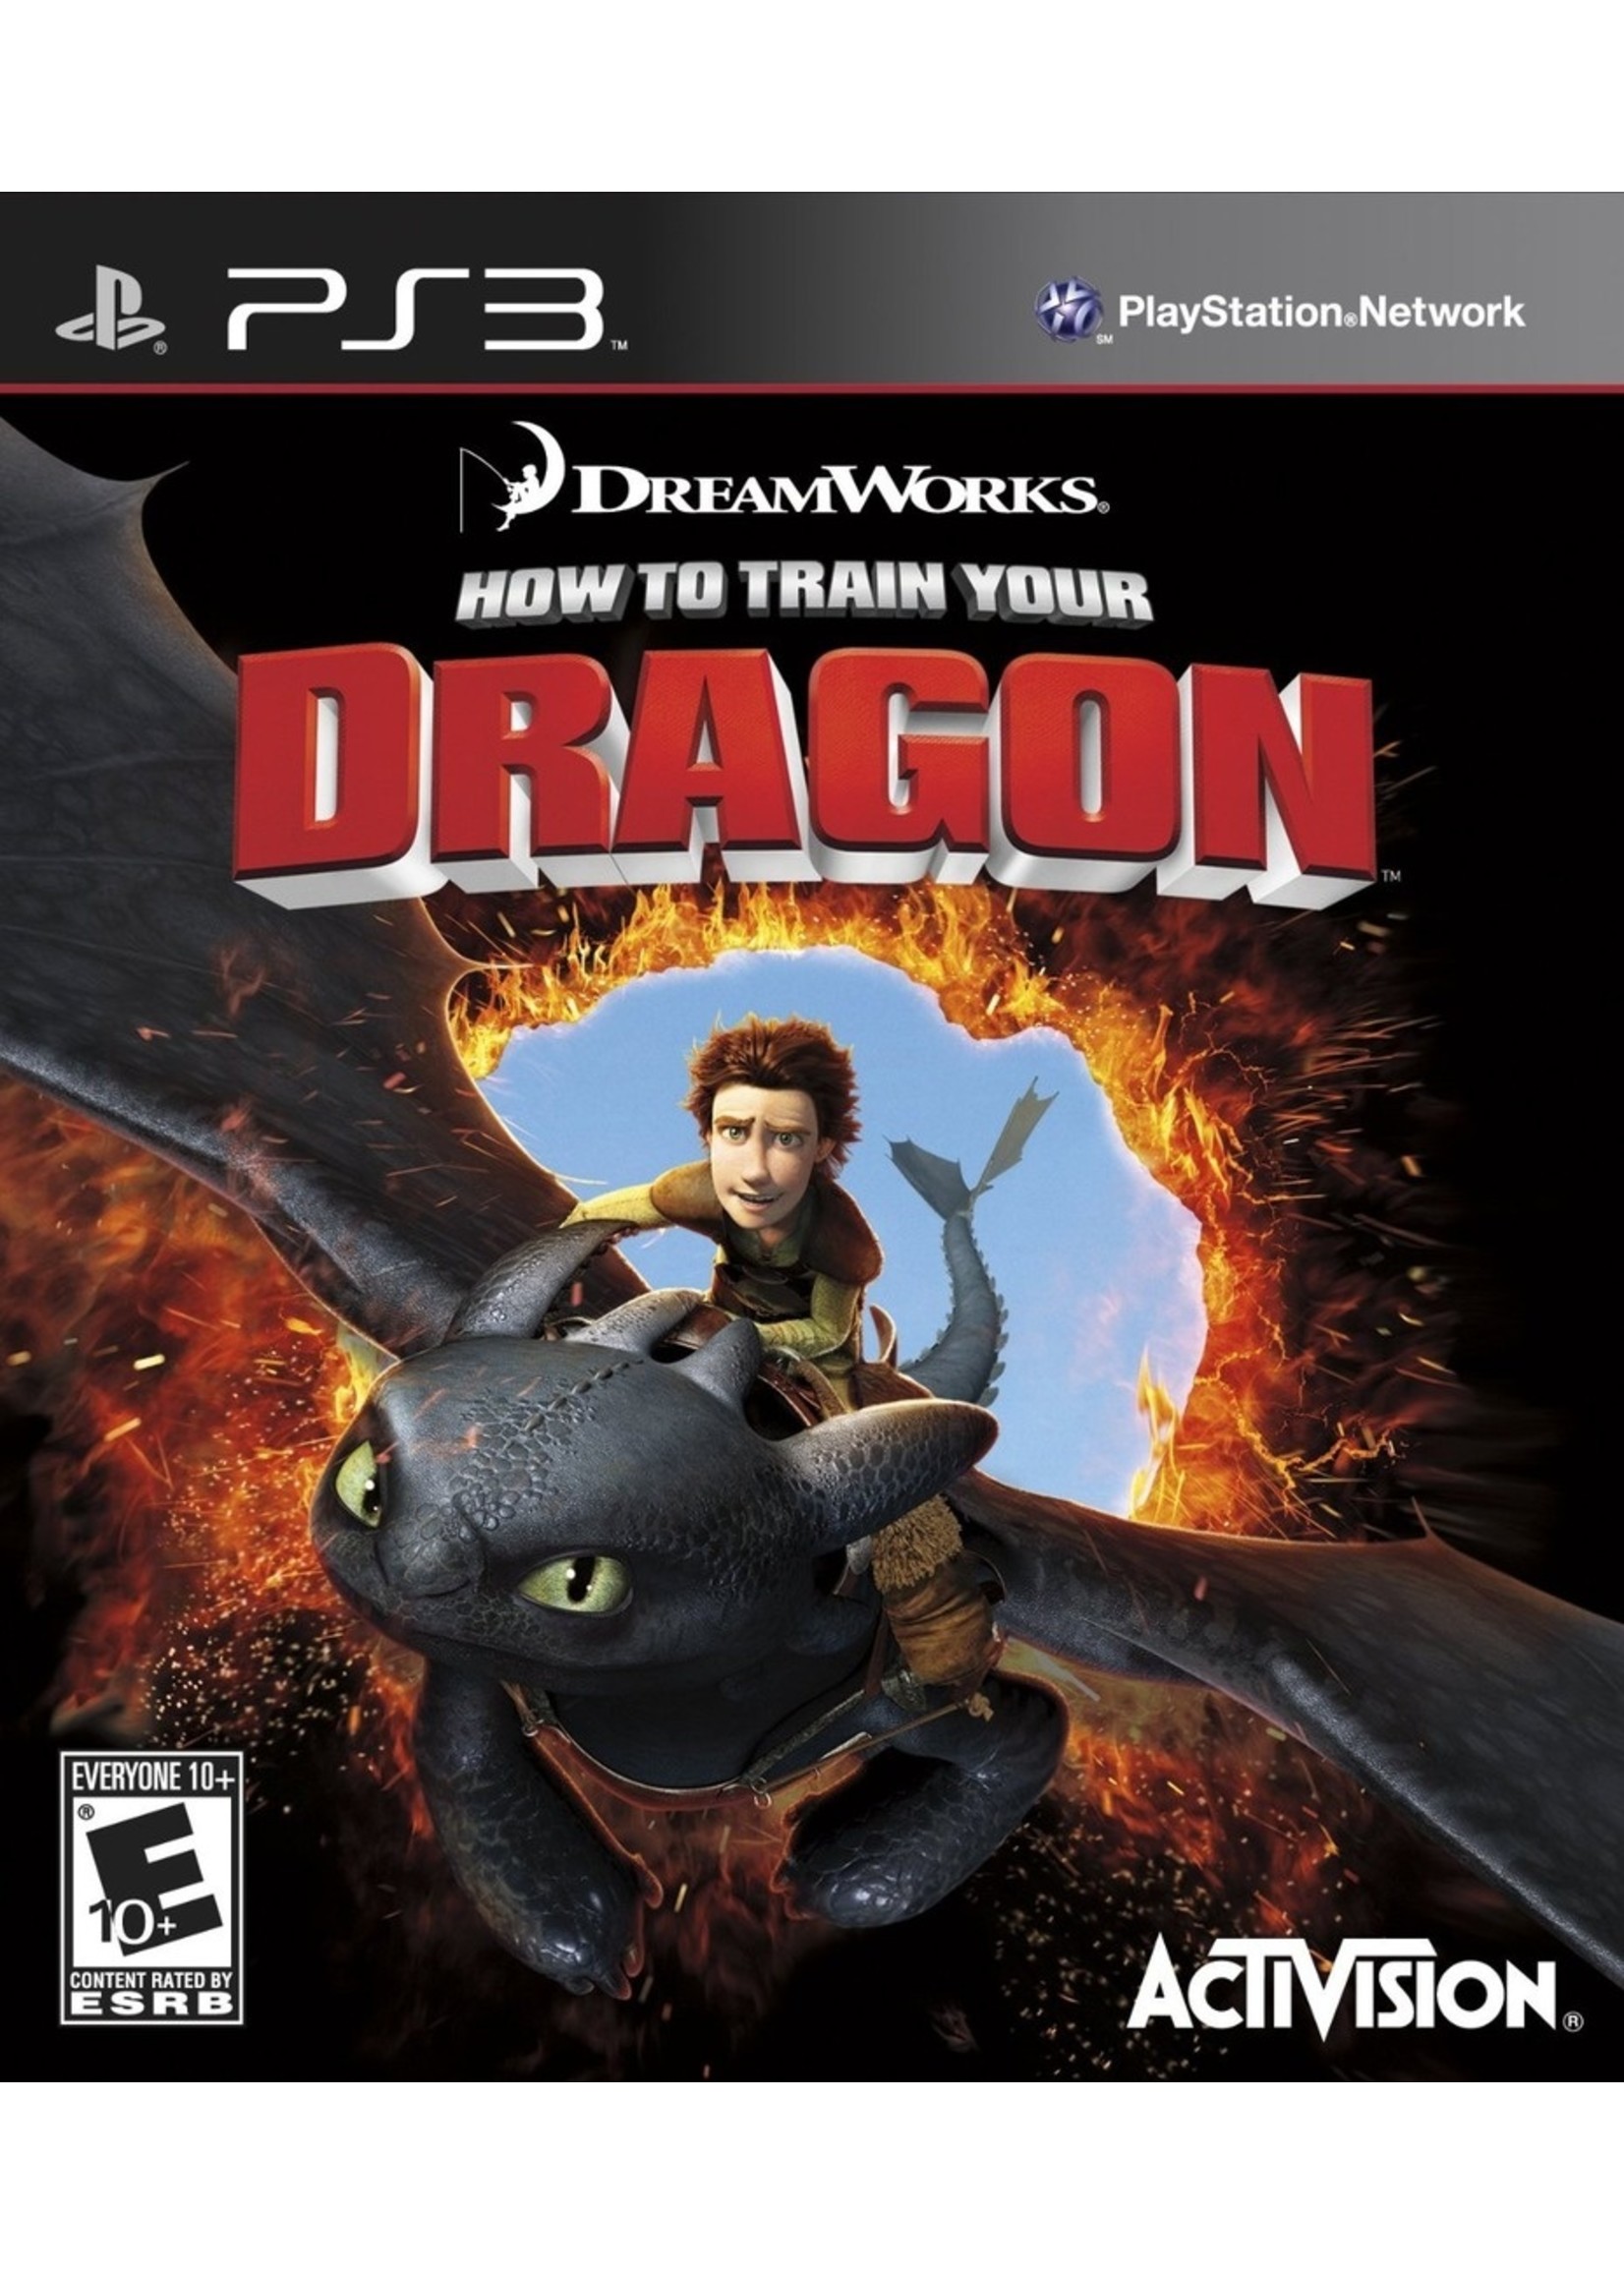 Sony Playstation 3 (PS3) How to Train Your Dragon 2